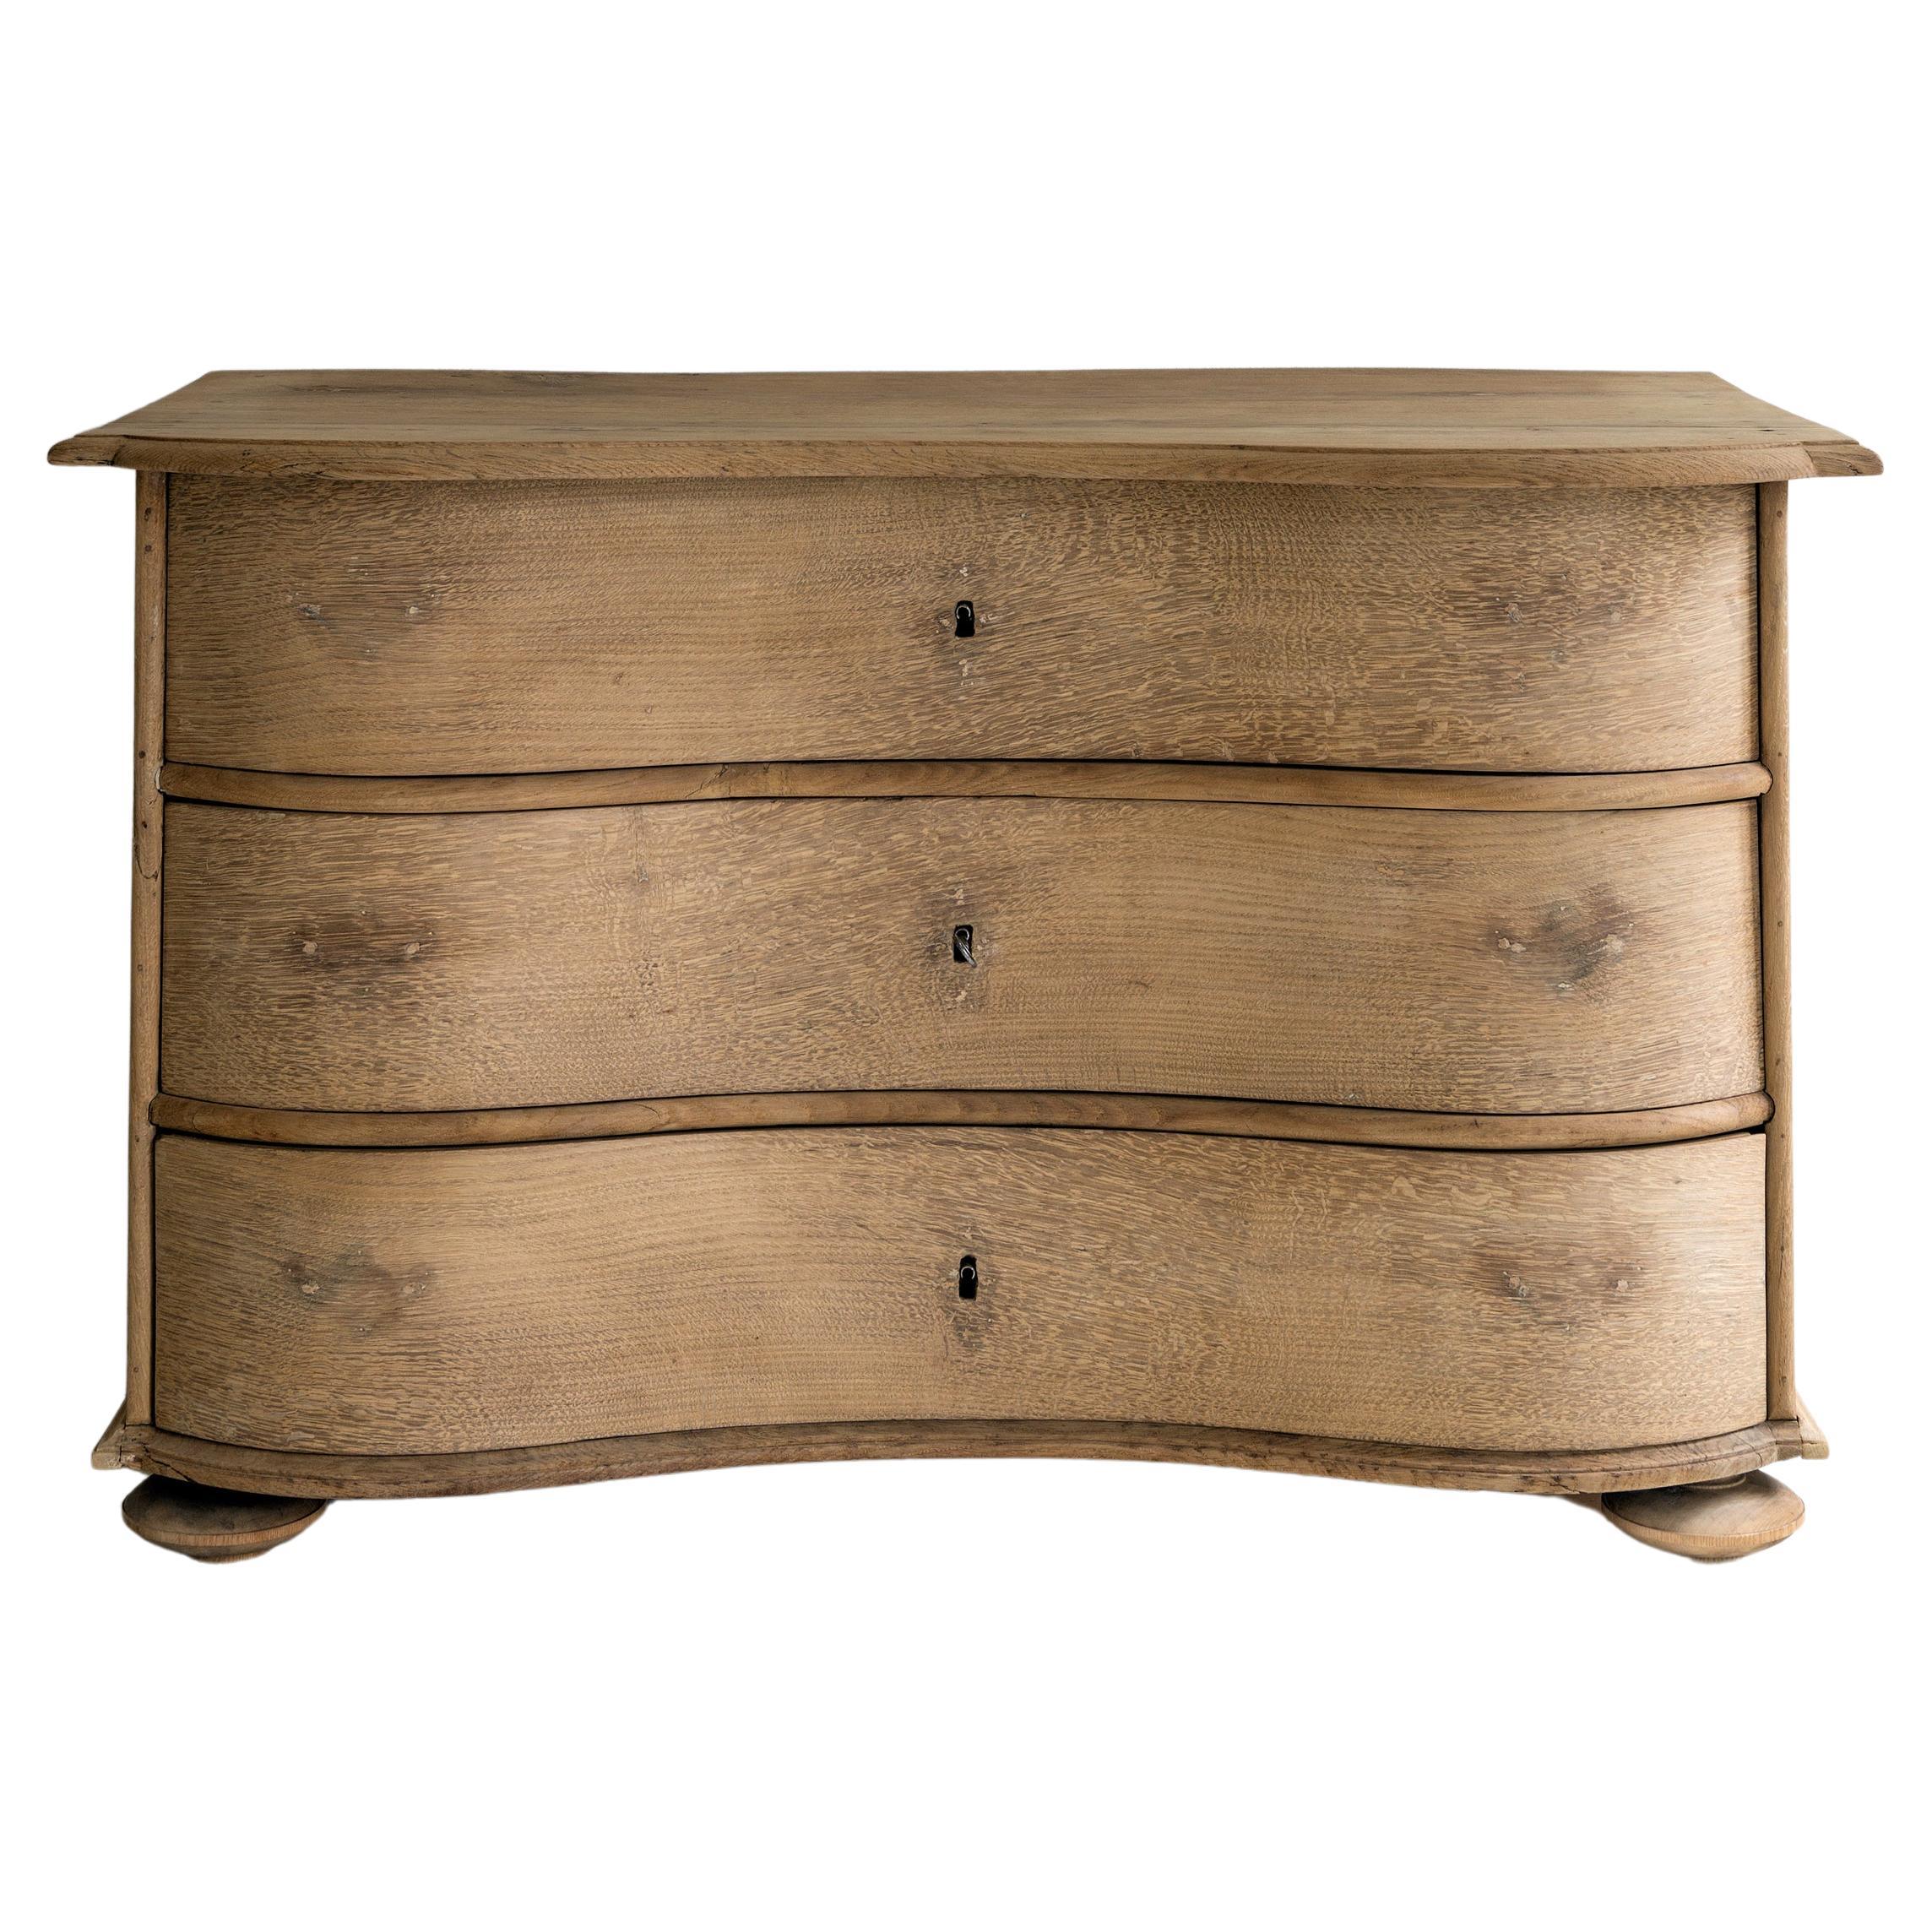 Elegant Northern 18th Century Baroque Commode Galbée in Bleached Oak